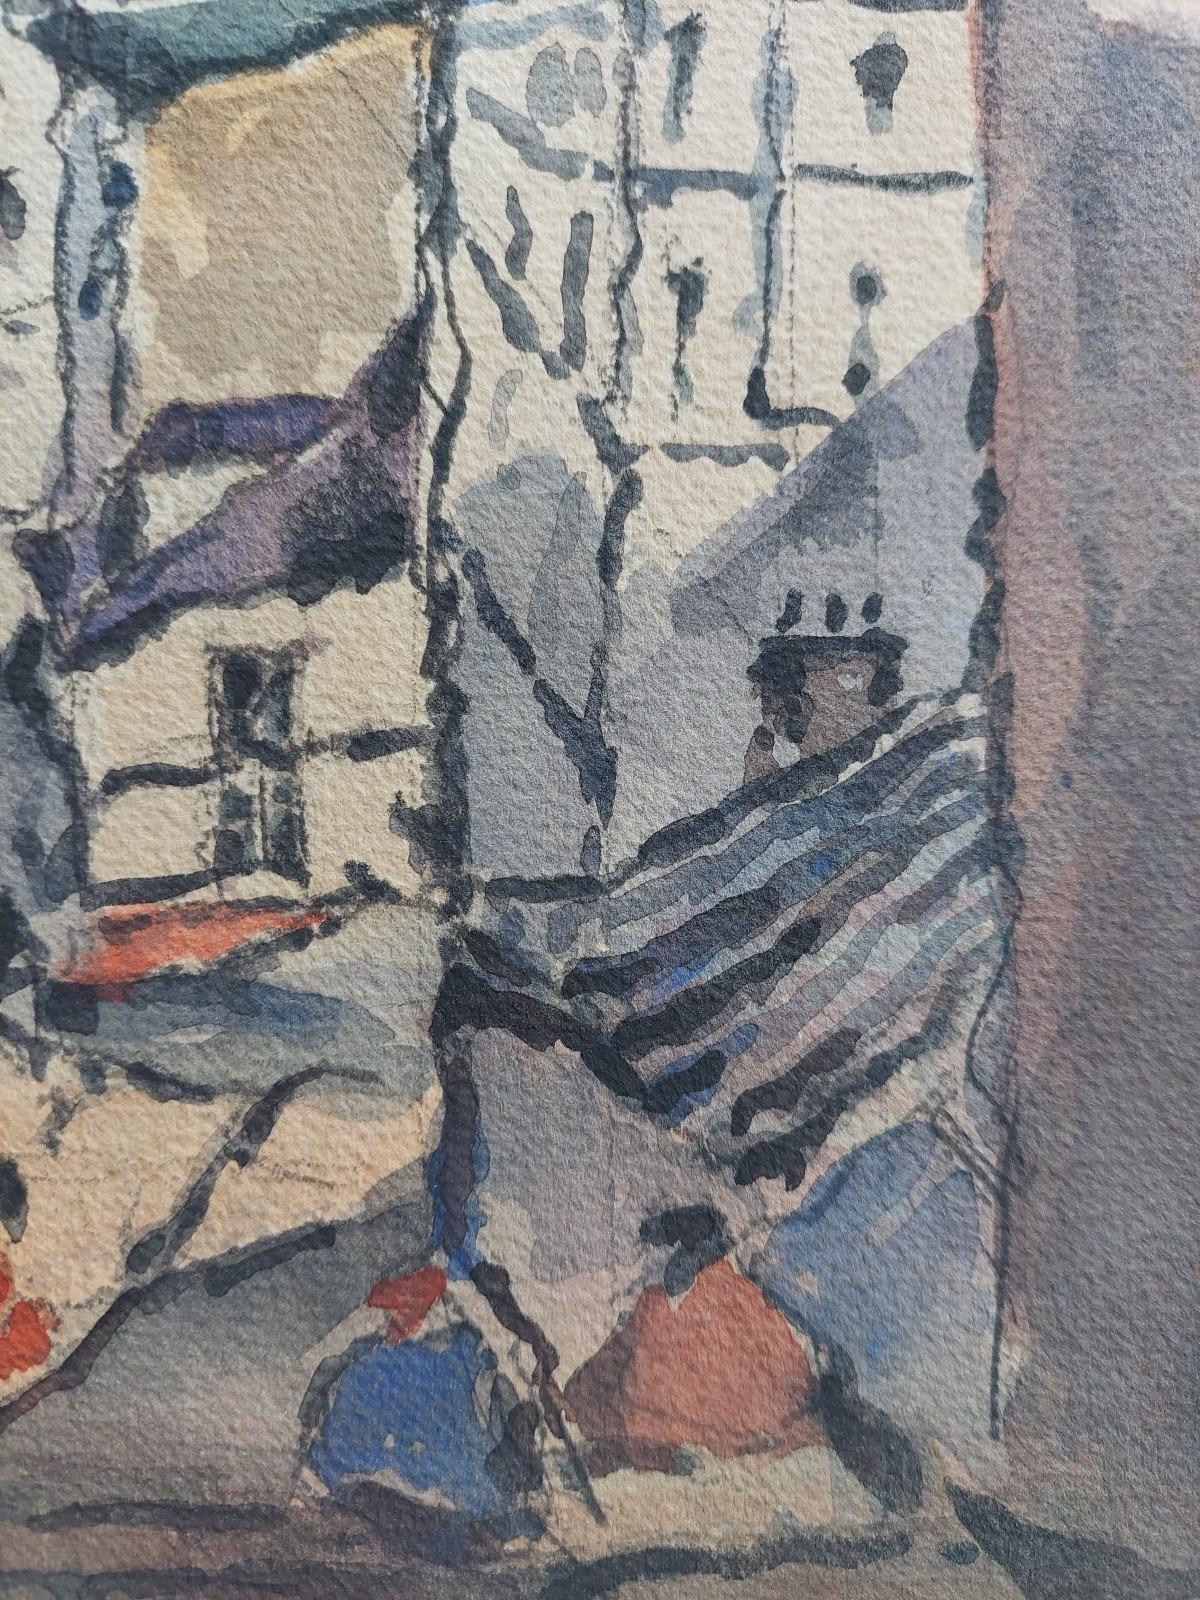 French Modernist Cubist Painting Steps into the Town In Good Condition For Sale In Cirencester, GB